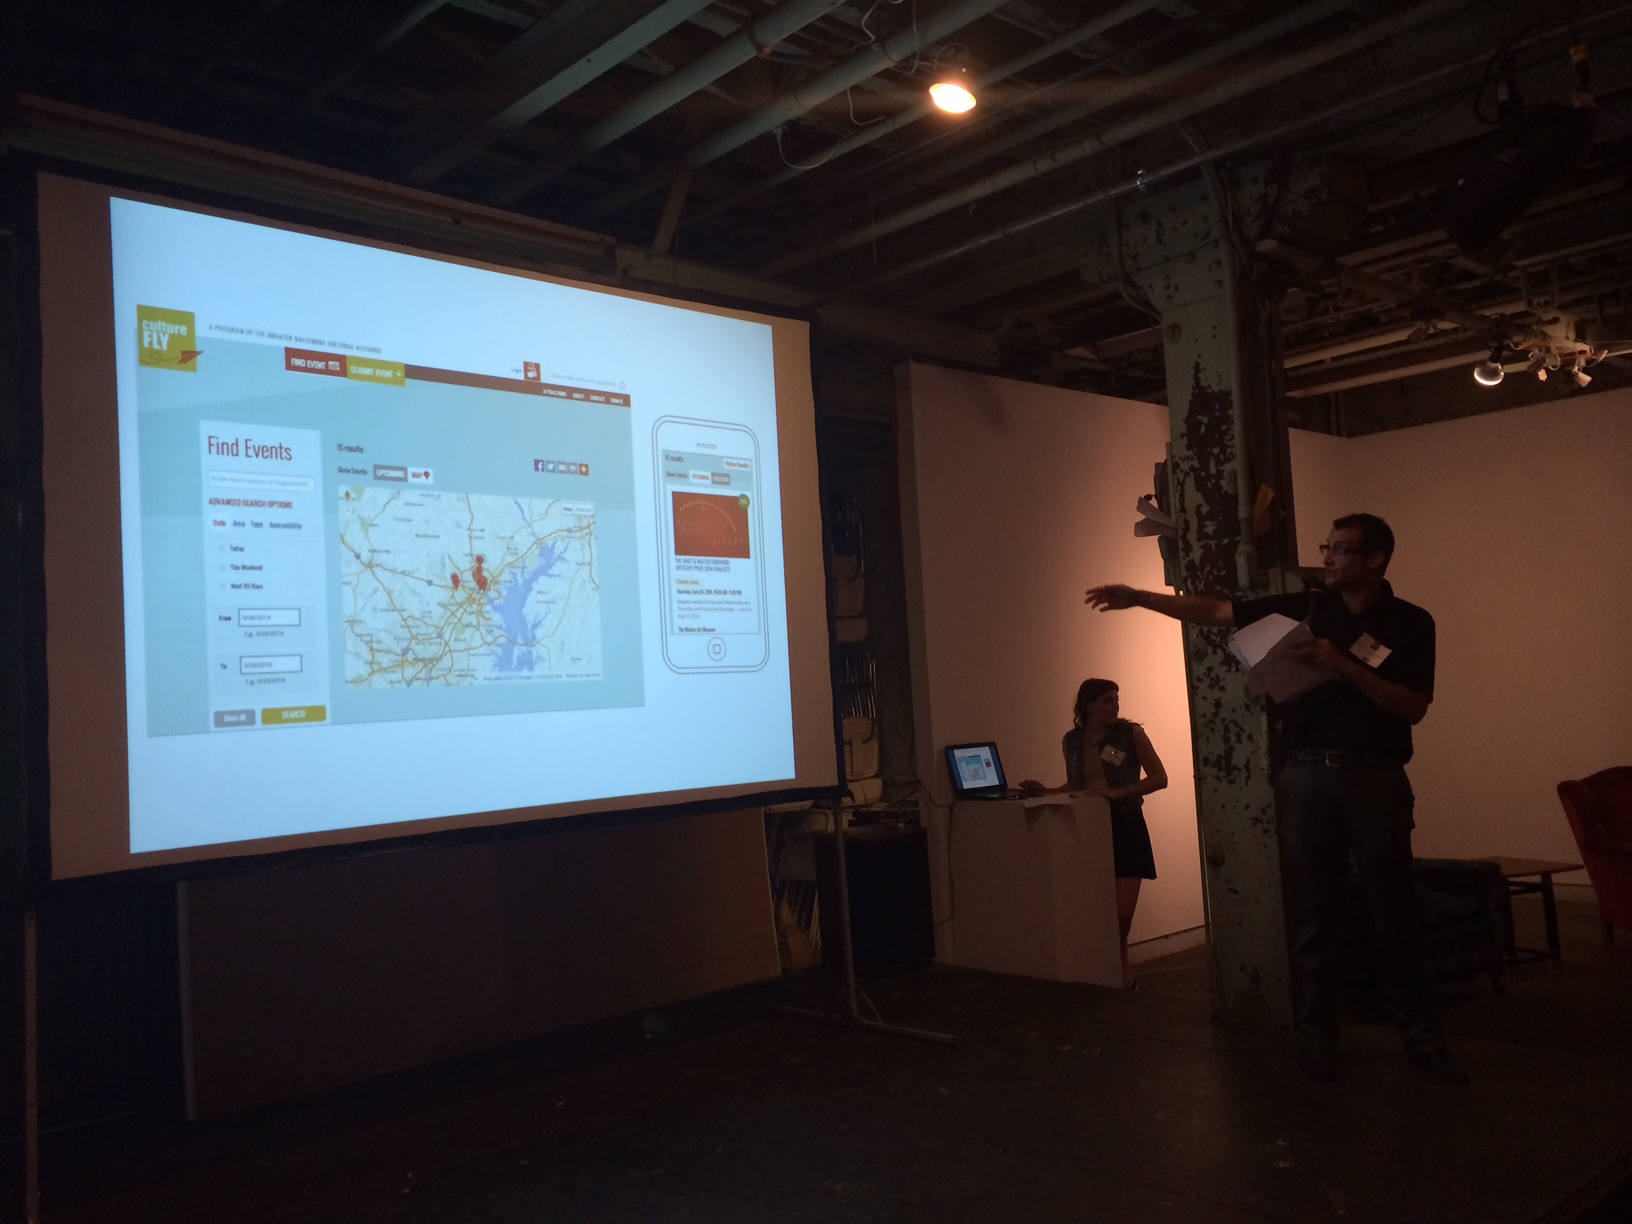 GBCA’s David London discusses the new Culture Fly site at Area 405.